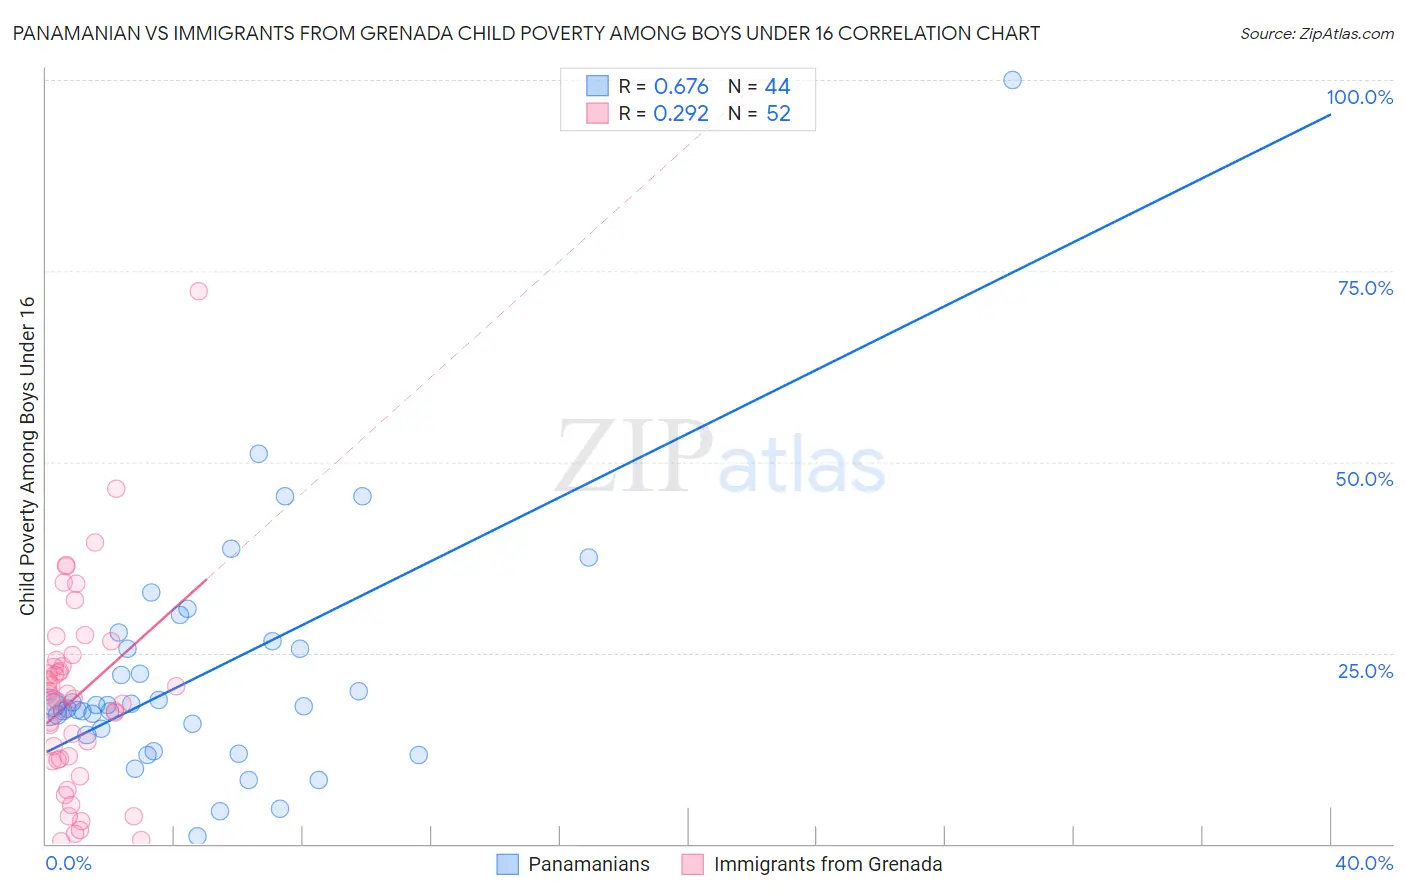 Panamanian vs Immigrants from Grenada Child Poverty Among Boys Under 16